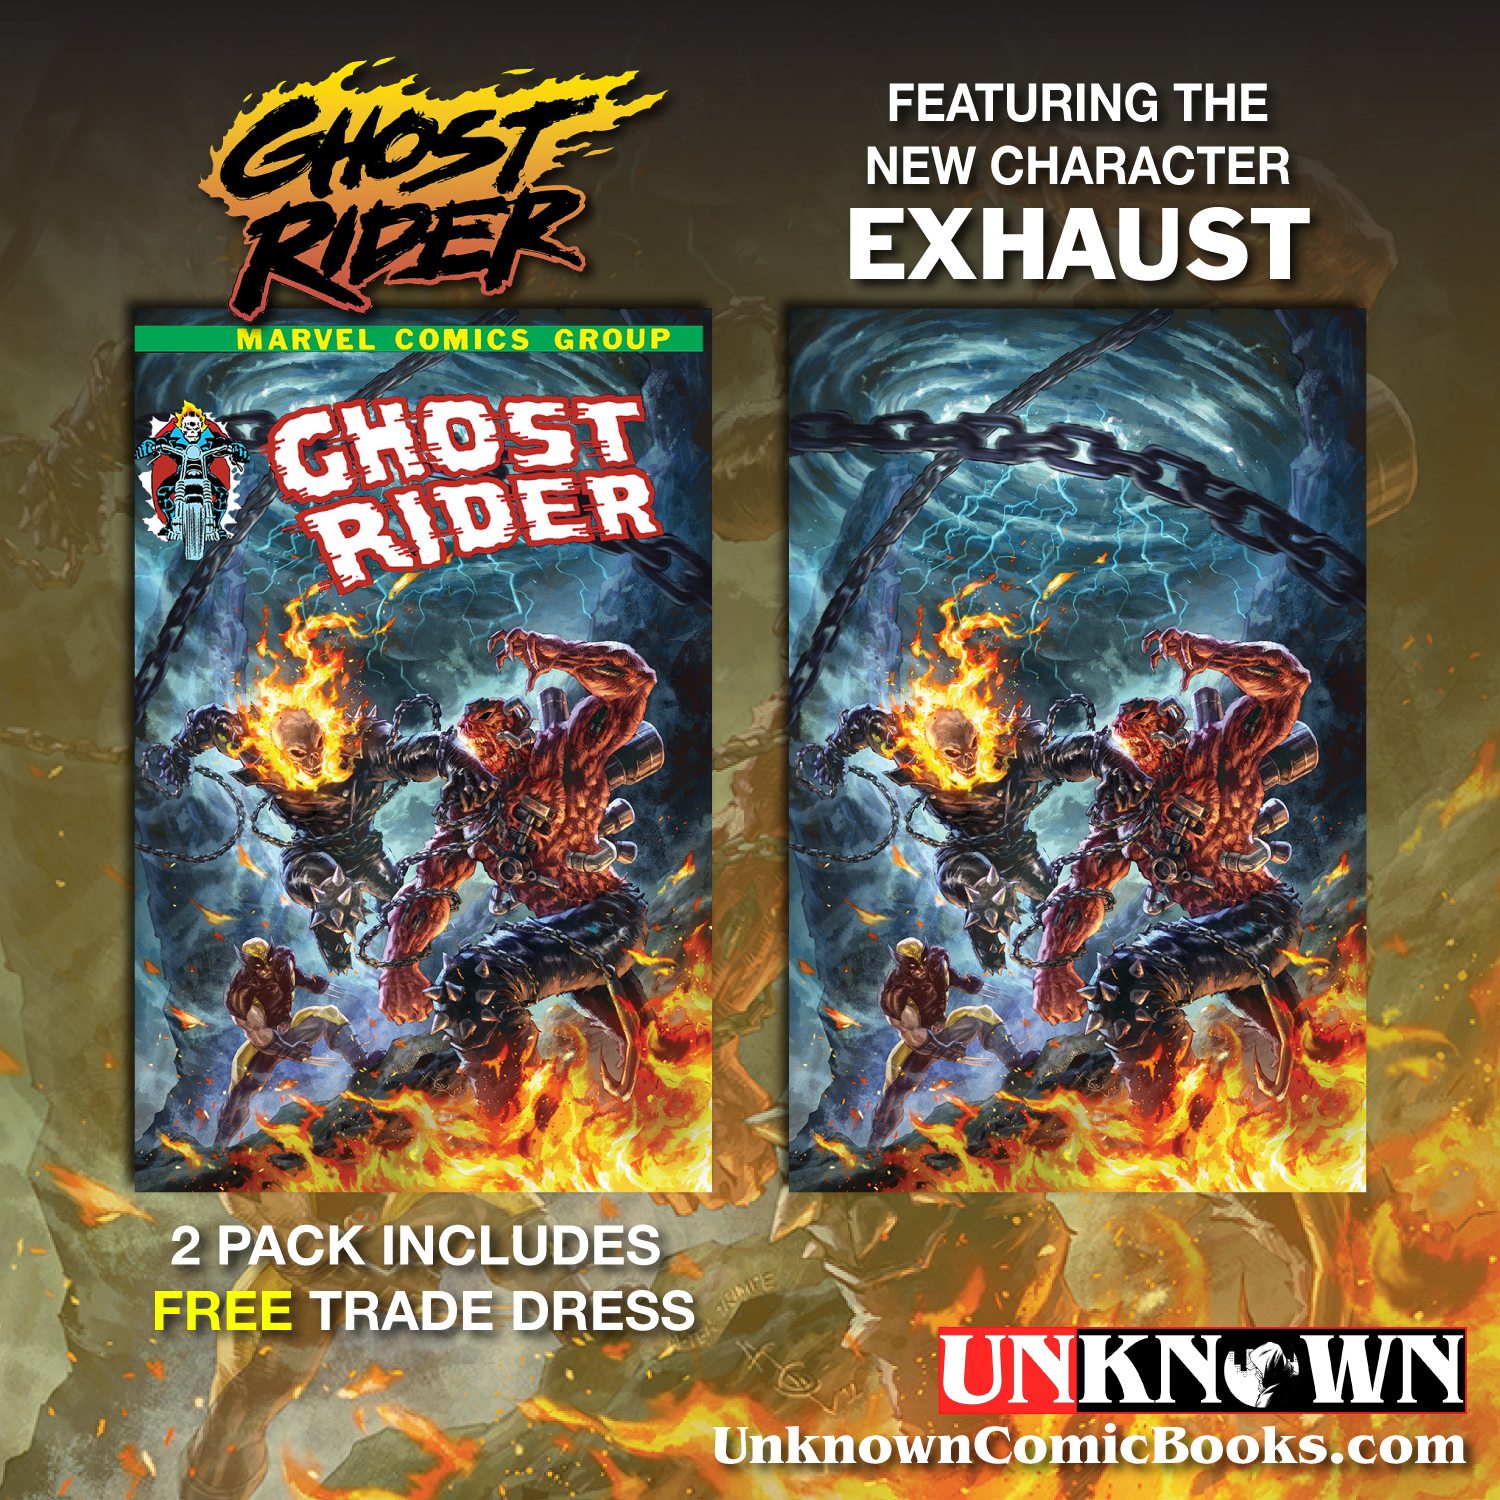 2 PACK **FREE TRADE DRESS** GHOST RIDER #7 UNKNOWN COMICS ALAN QUAH EXCLUSIVE VAR  (10/12/2022)